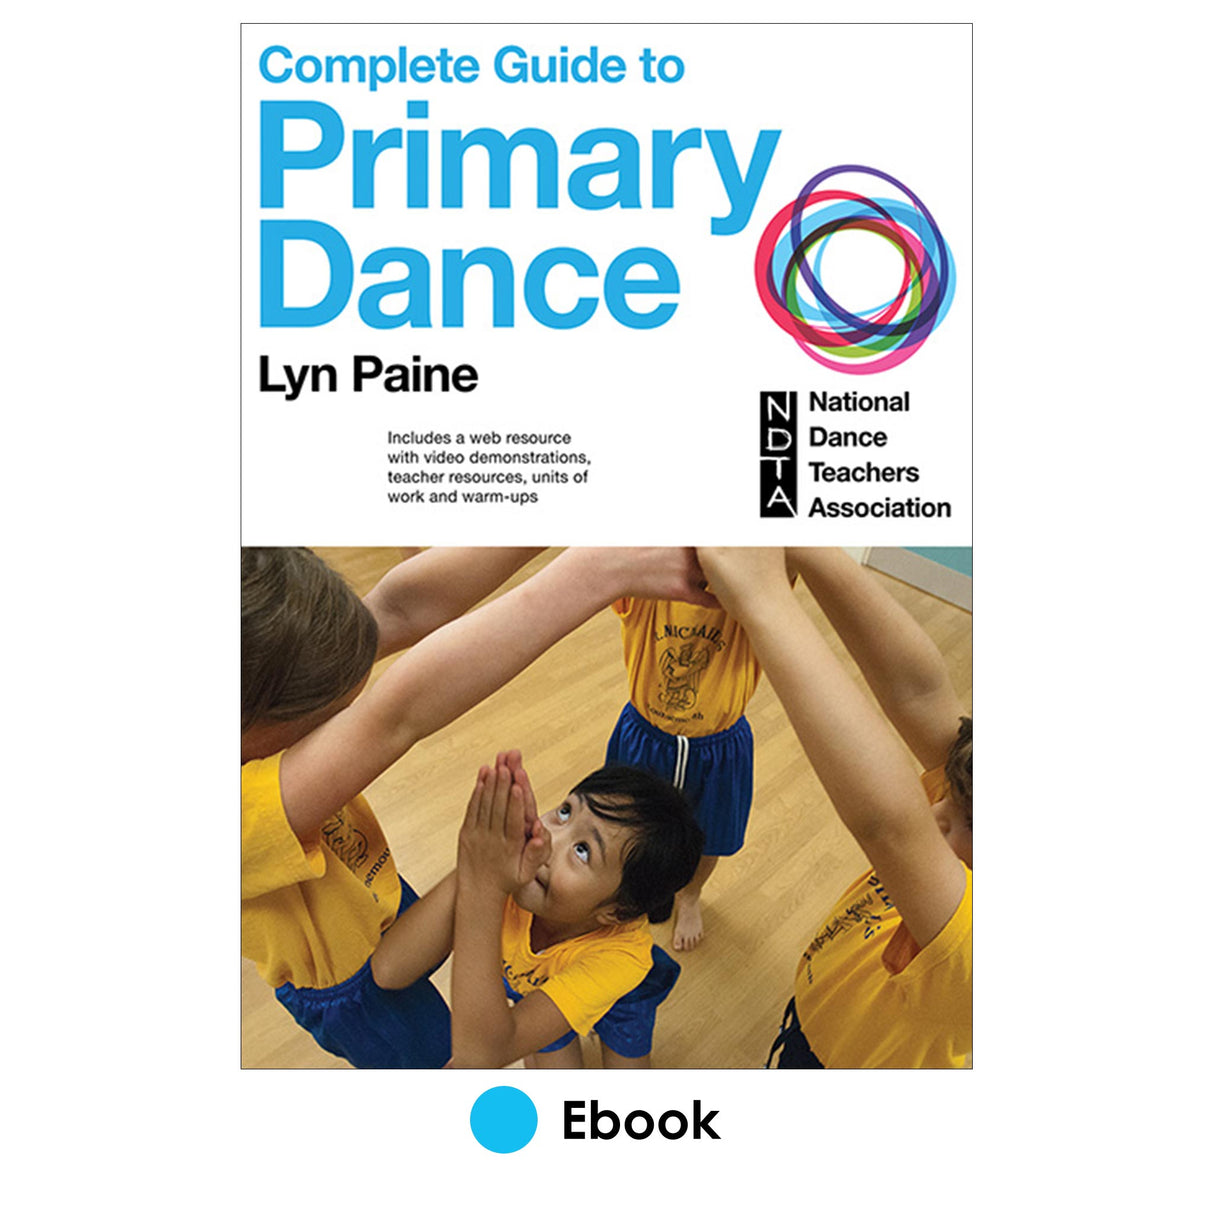 Complete Guide to Primary Dance PDF With Web Resource, The